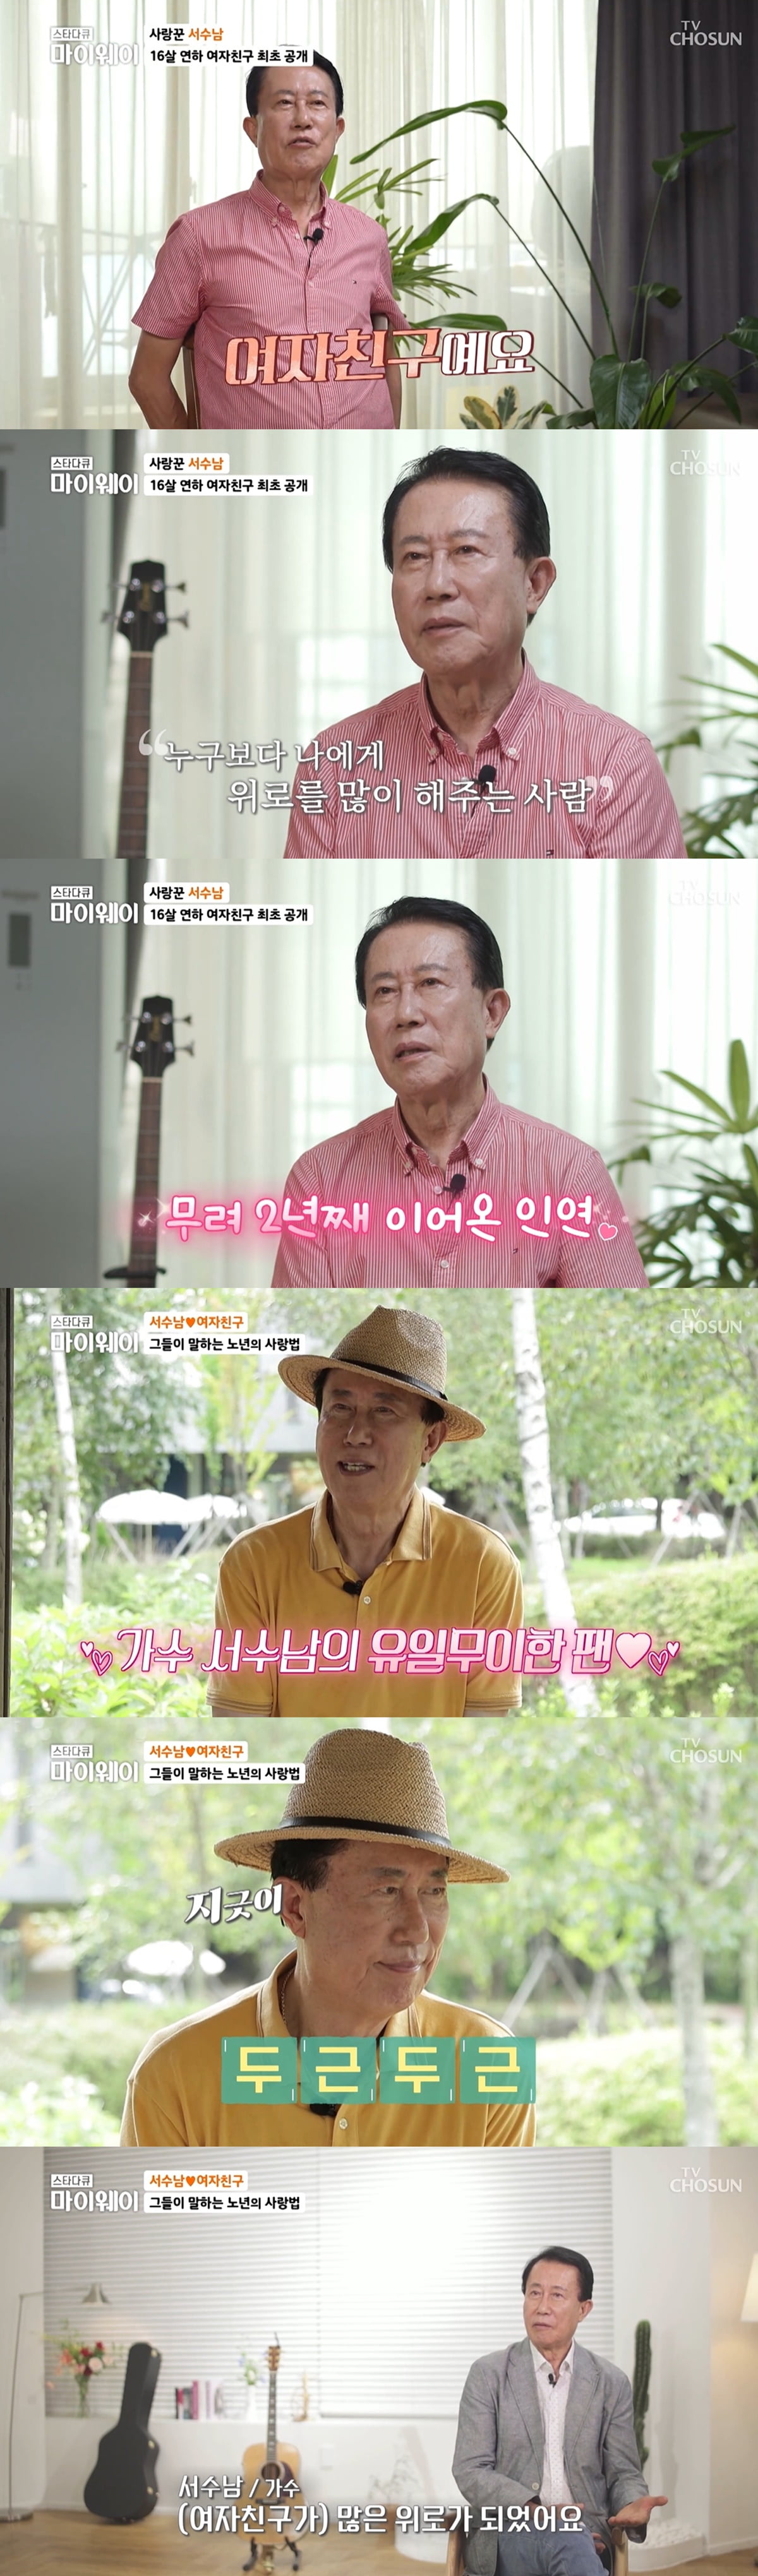 80-year-old Seo Soo-nam reveals girlfriend 16 years younger than him